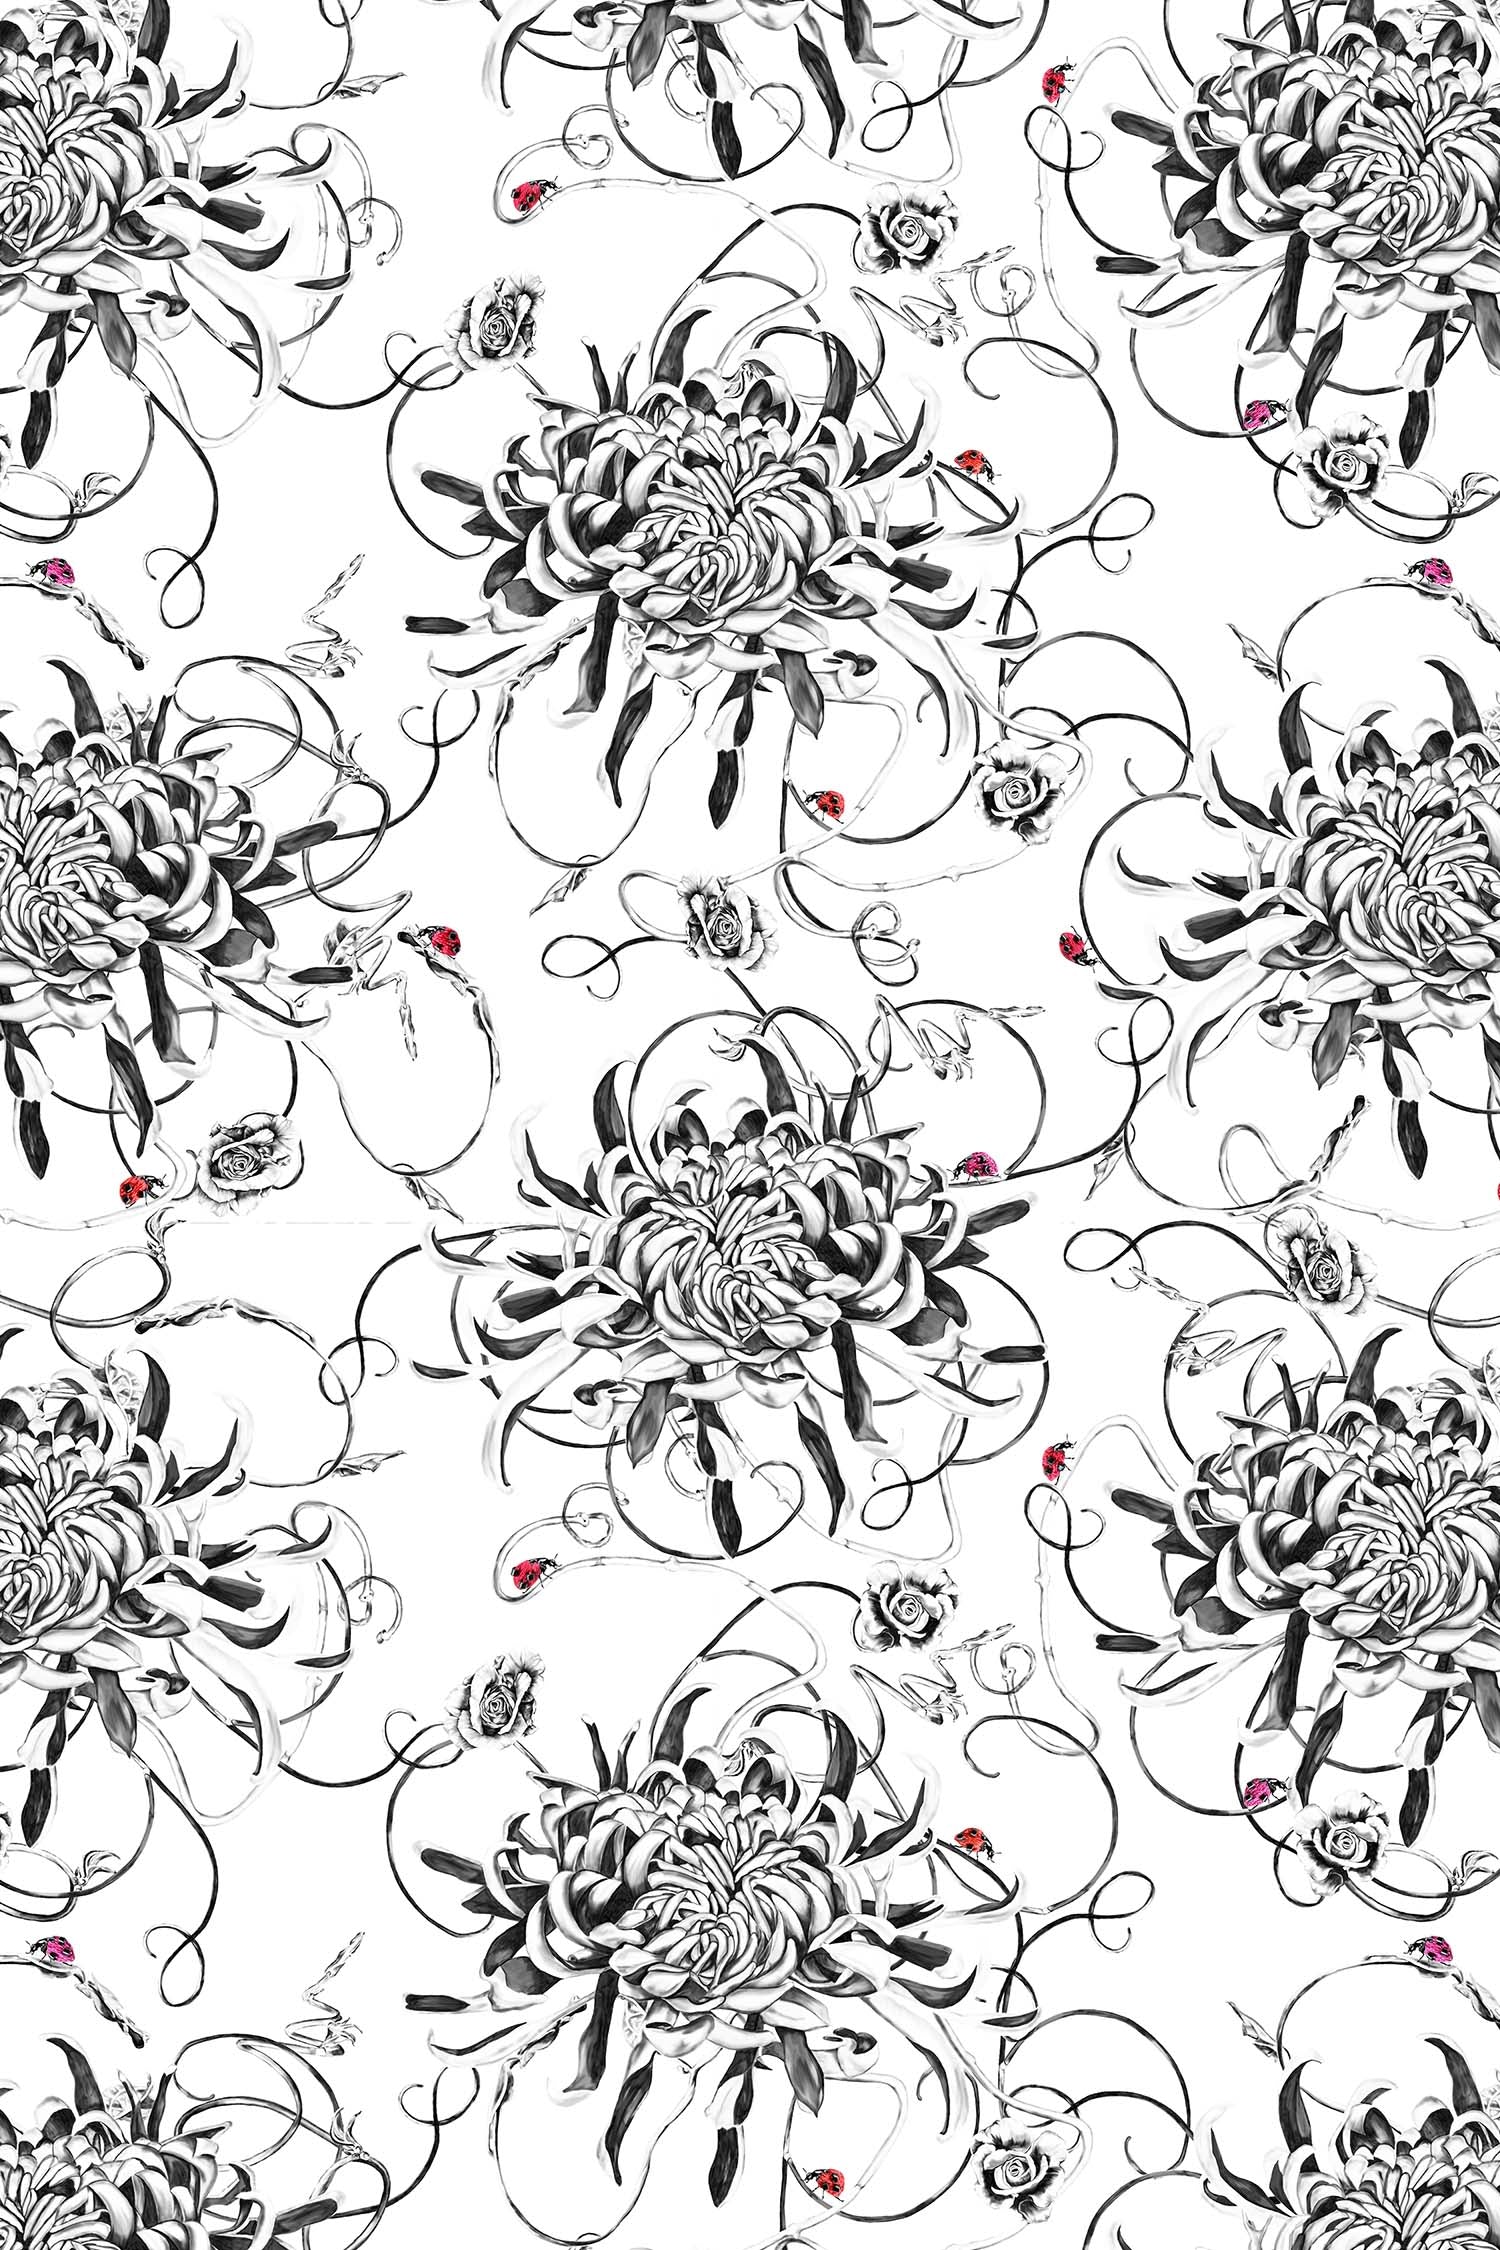  Monochrome floral wallpaper with red ladybirds 